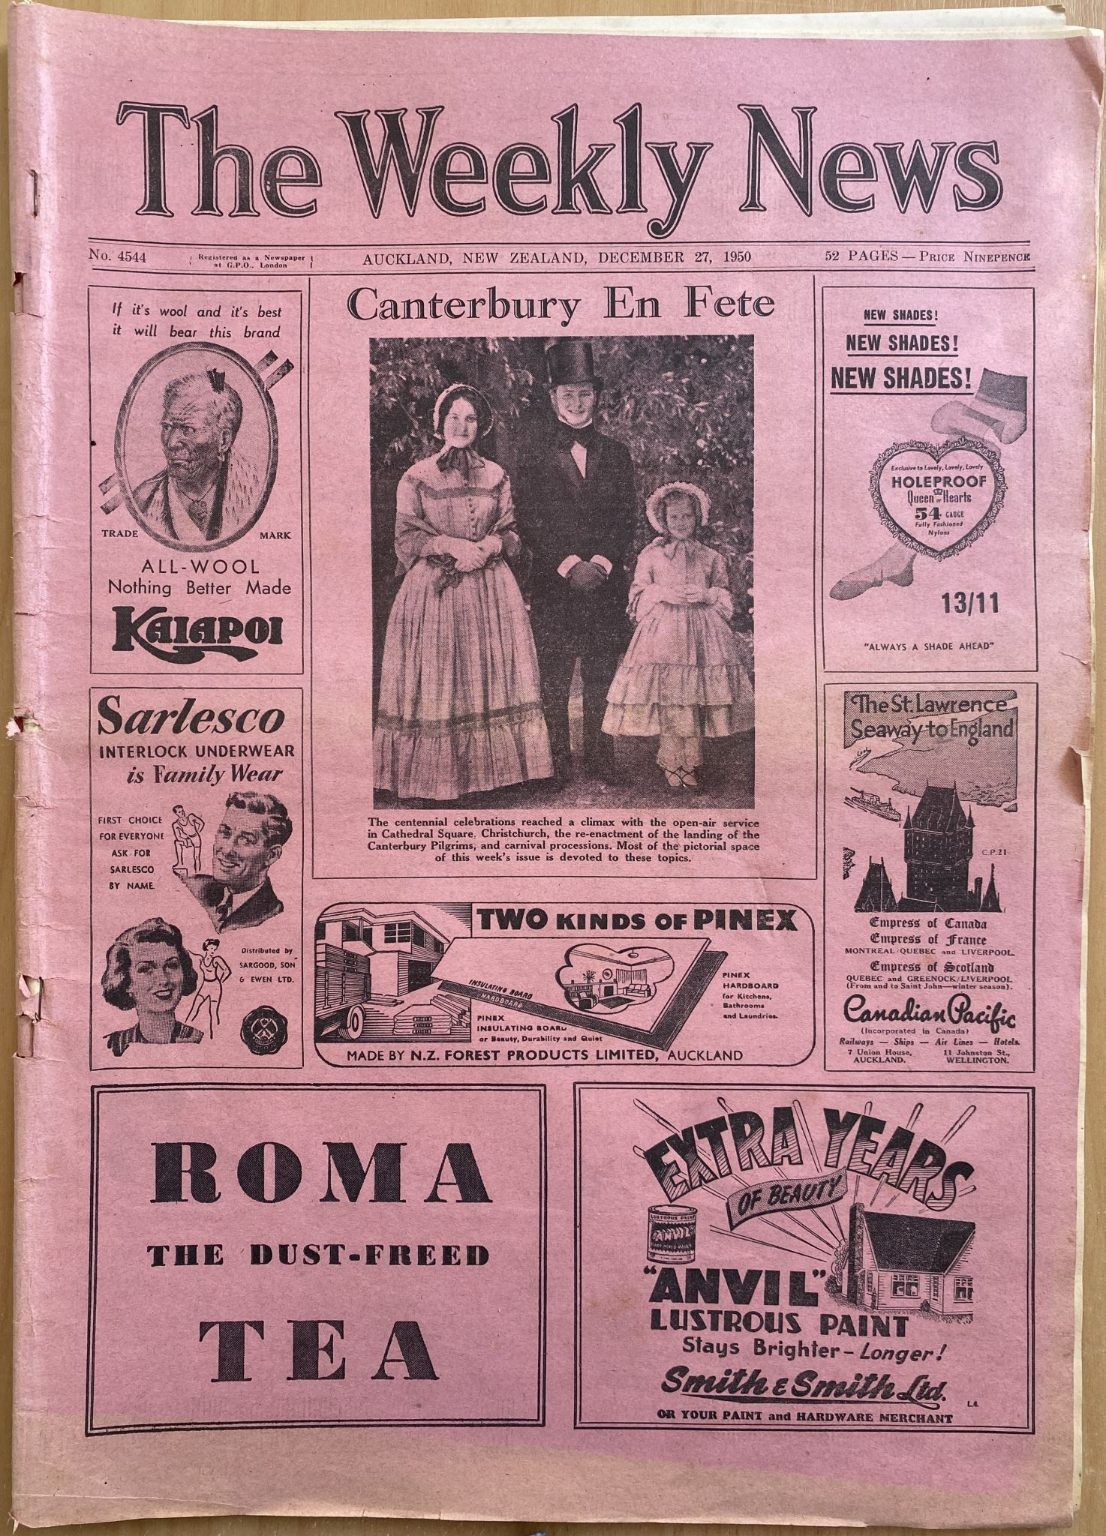 OLD NEWSPAPER: The Weekly News, No. 4544, 27 December 1950